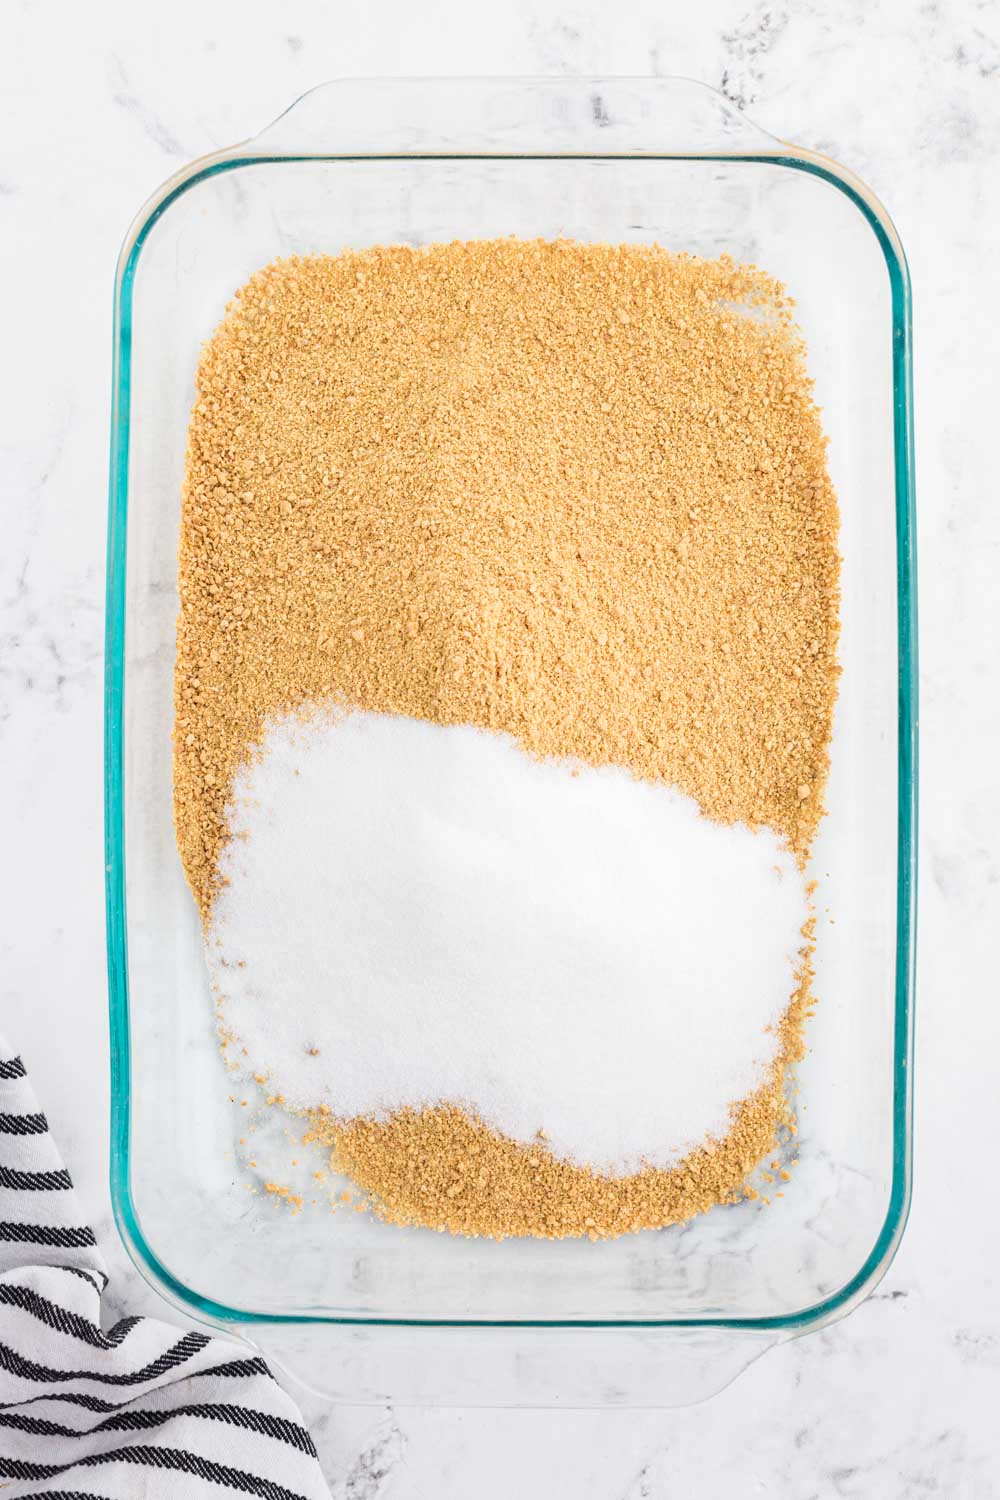 Graham cracker crumbs and granulated sugar added to a 9x13-inch baking dish, striped linen, on a white marble surface.